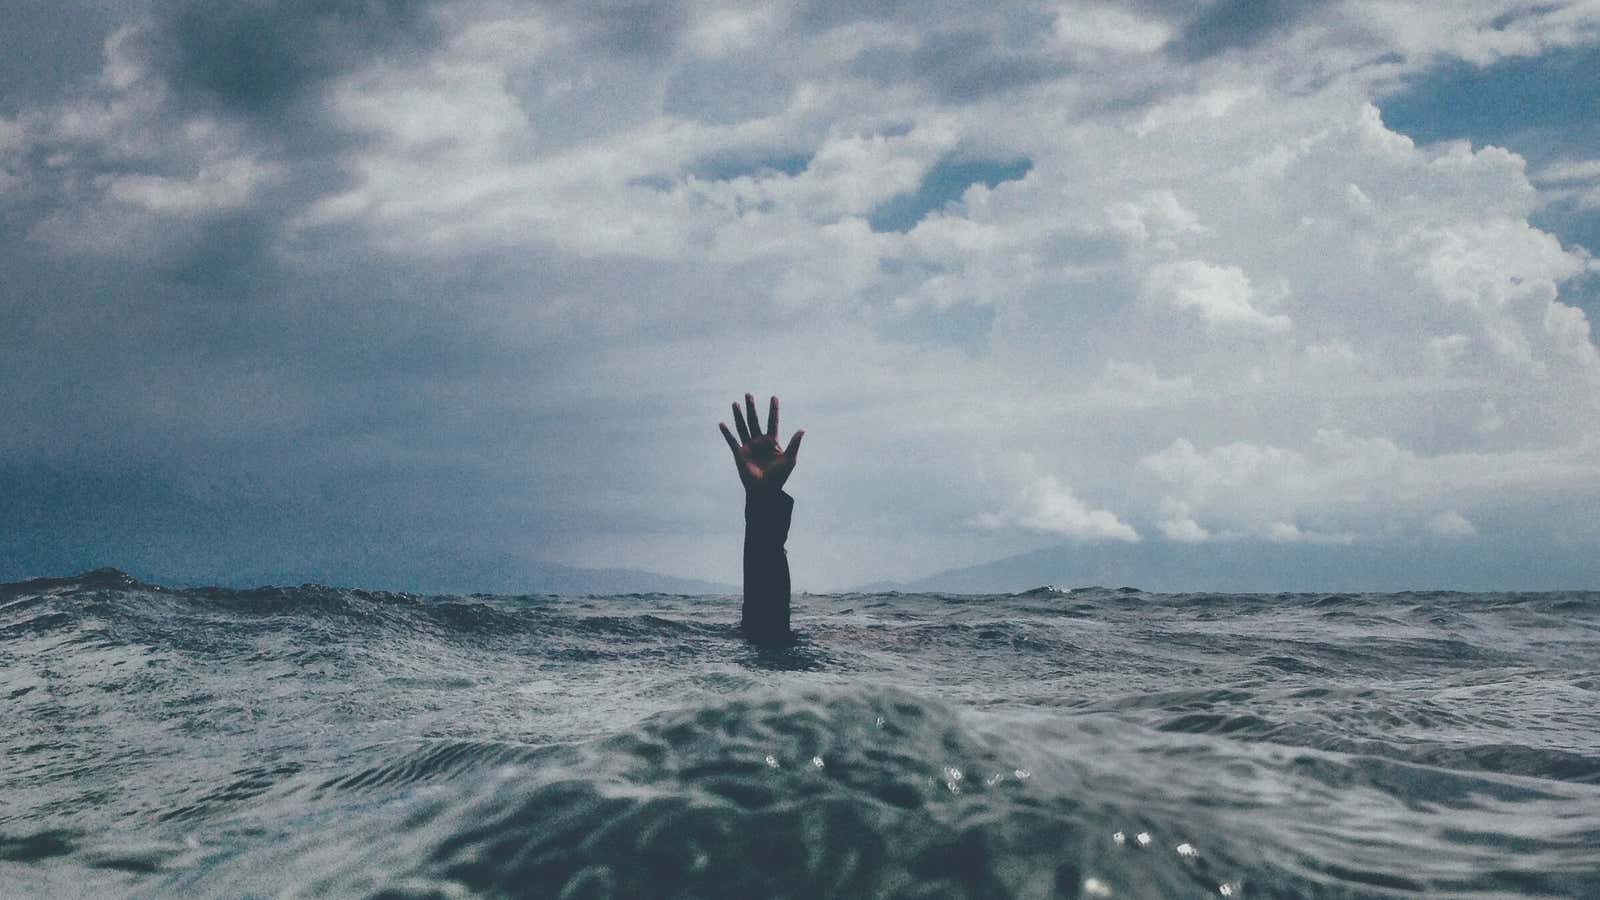 Drowning in sorrow? It might not be all bad.